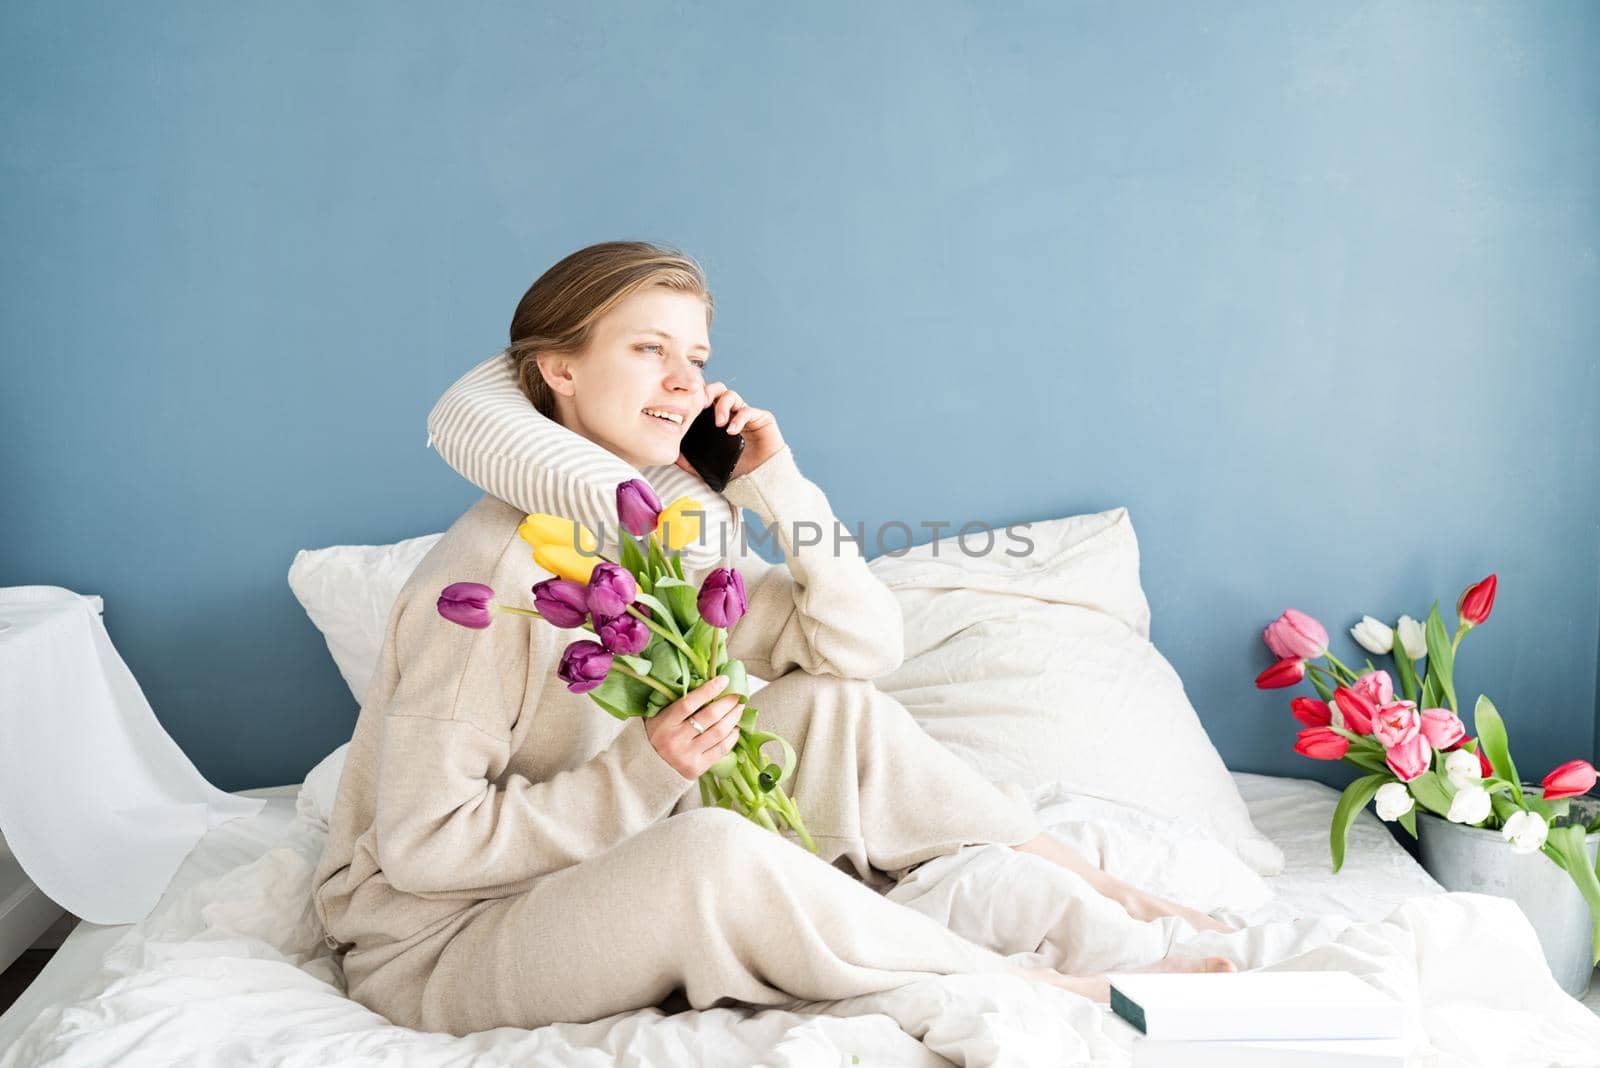 Happy woman sitting on the bed wearing pajamas talking on the phone by Desperada